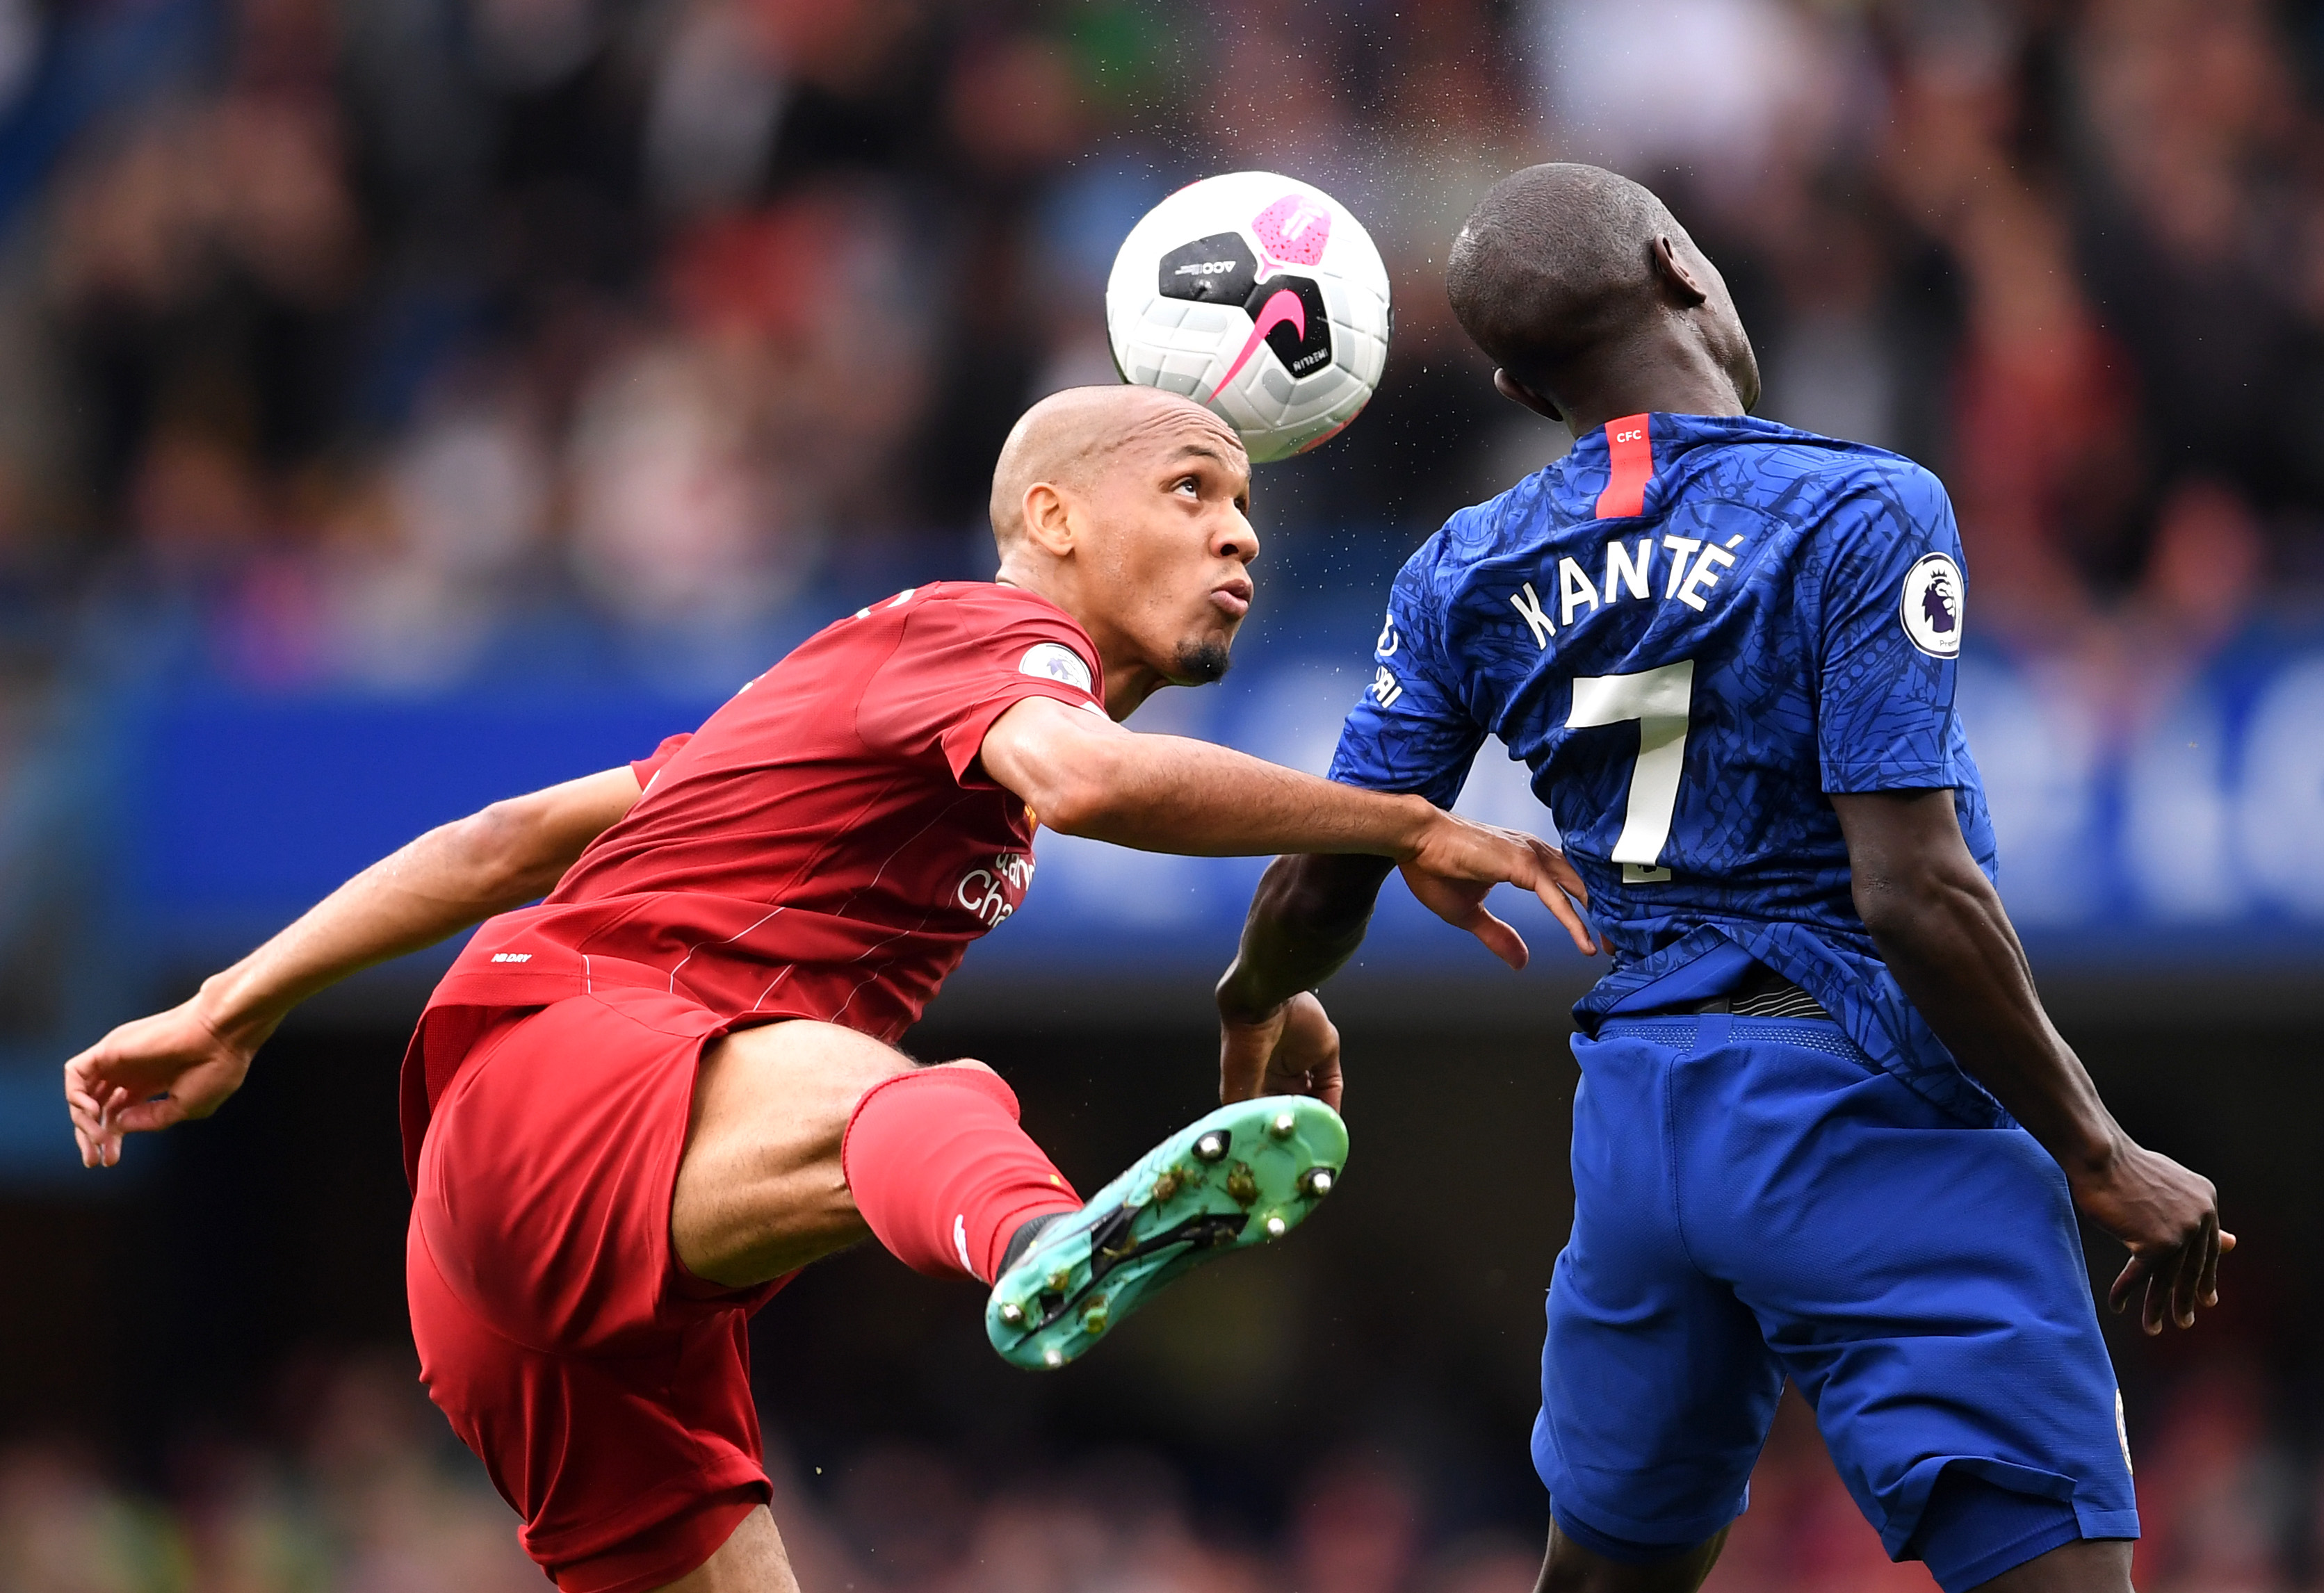 Fabinho was excellent once again. (Photo by Laurence Griffiths/Getty Images)